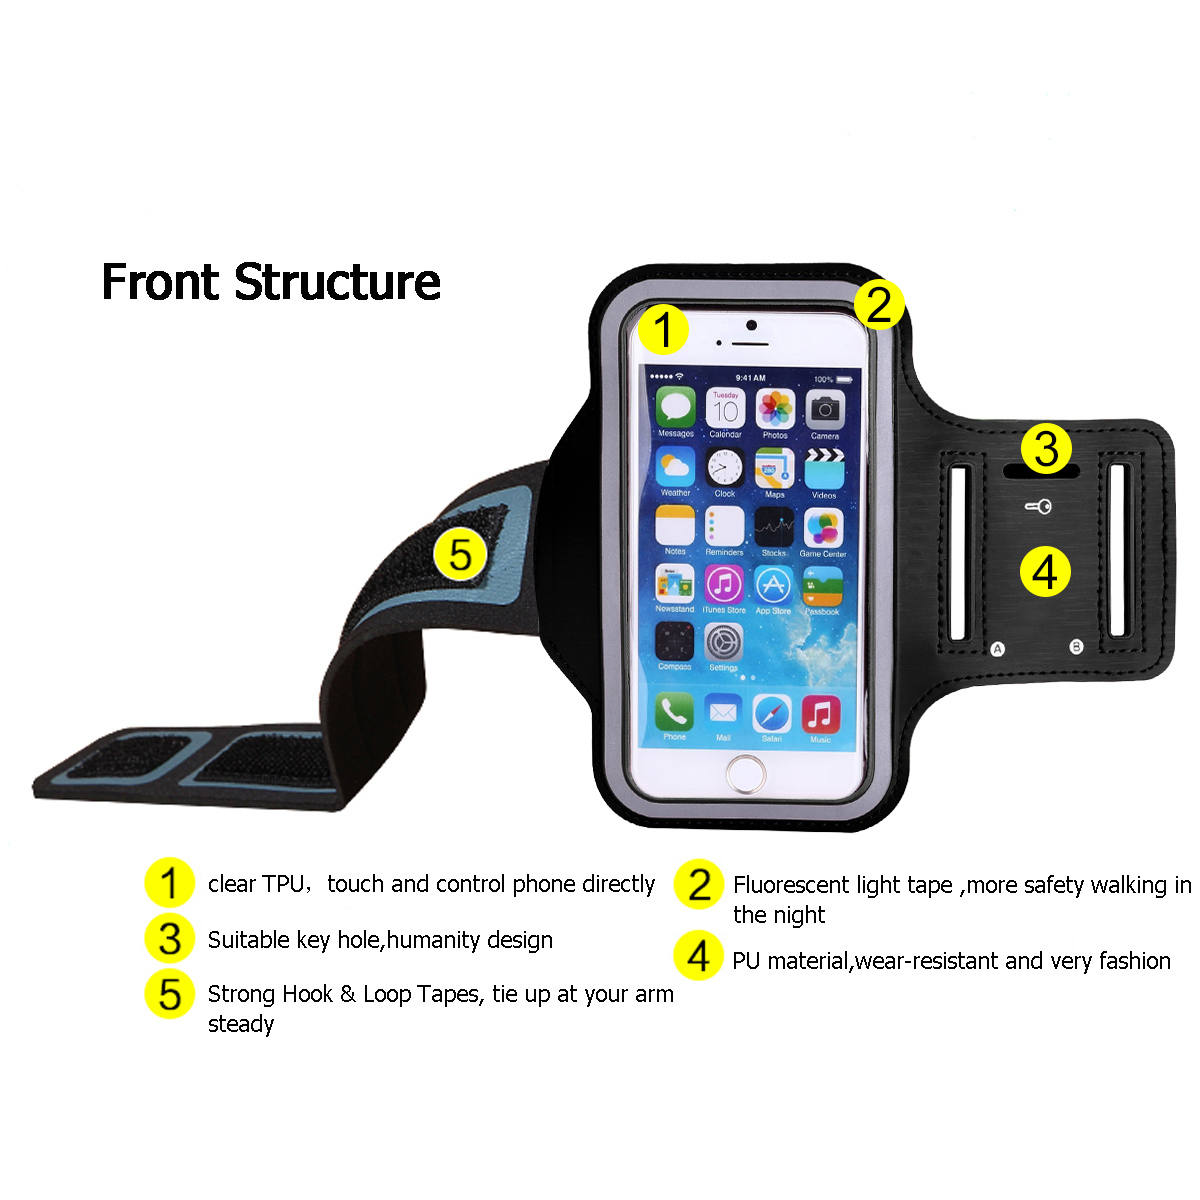 Universal-Sports-Elastic-Armband-Sweatproof-Touch-Screen-Mobile-Phone-Arm-Bags-with-Earphone-Port-fo-1890480-3